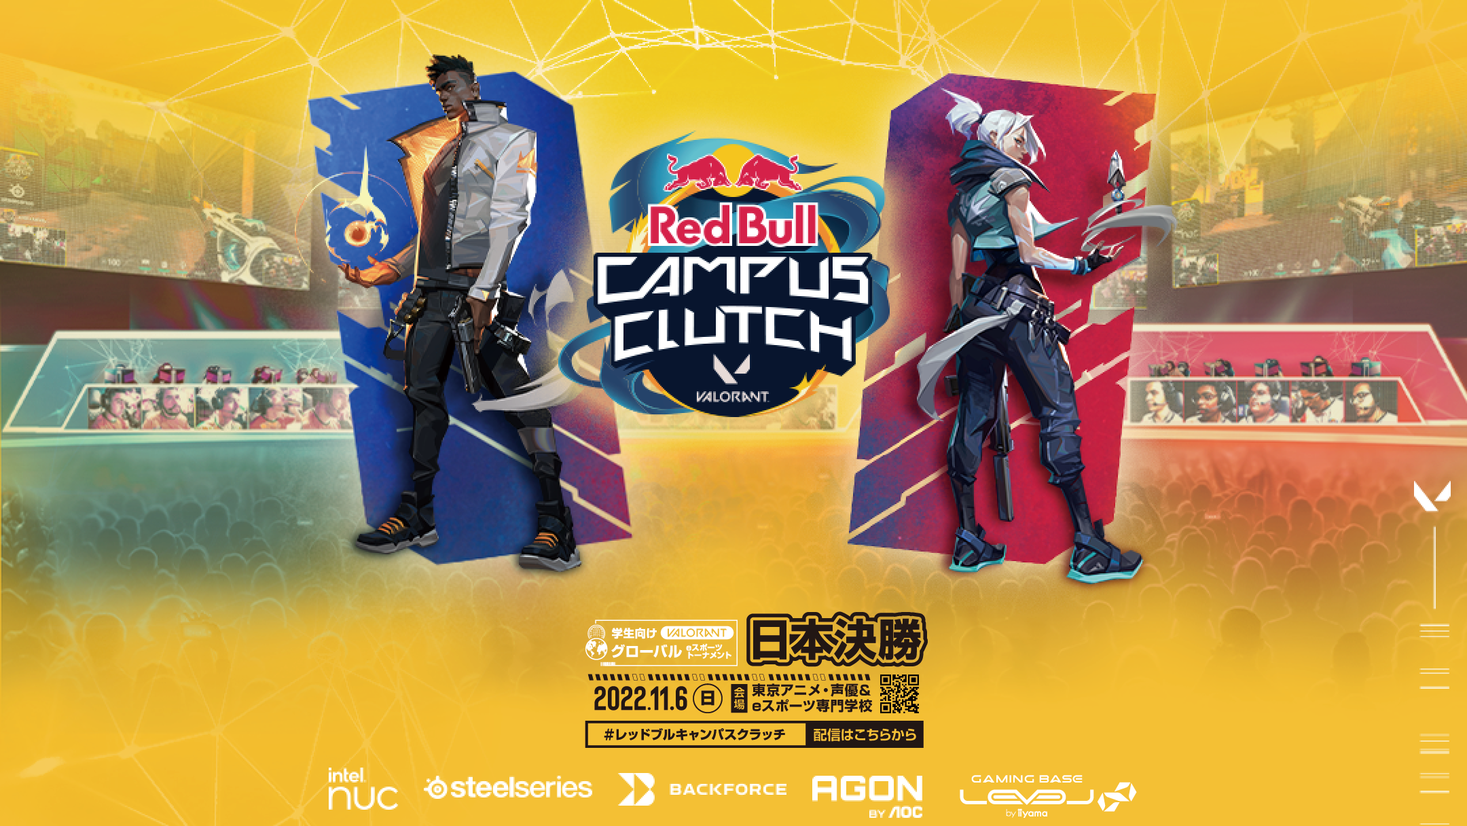 Red Bull Campus Clutch日本決勝、11月6日（日）12:00よりTwitch